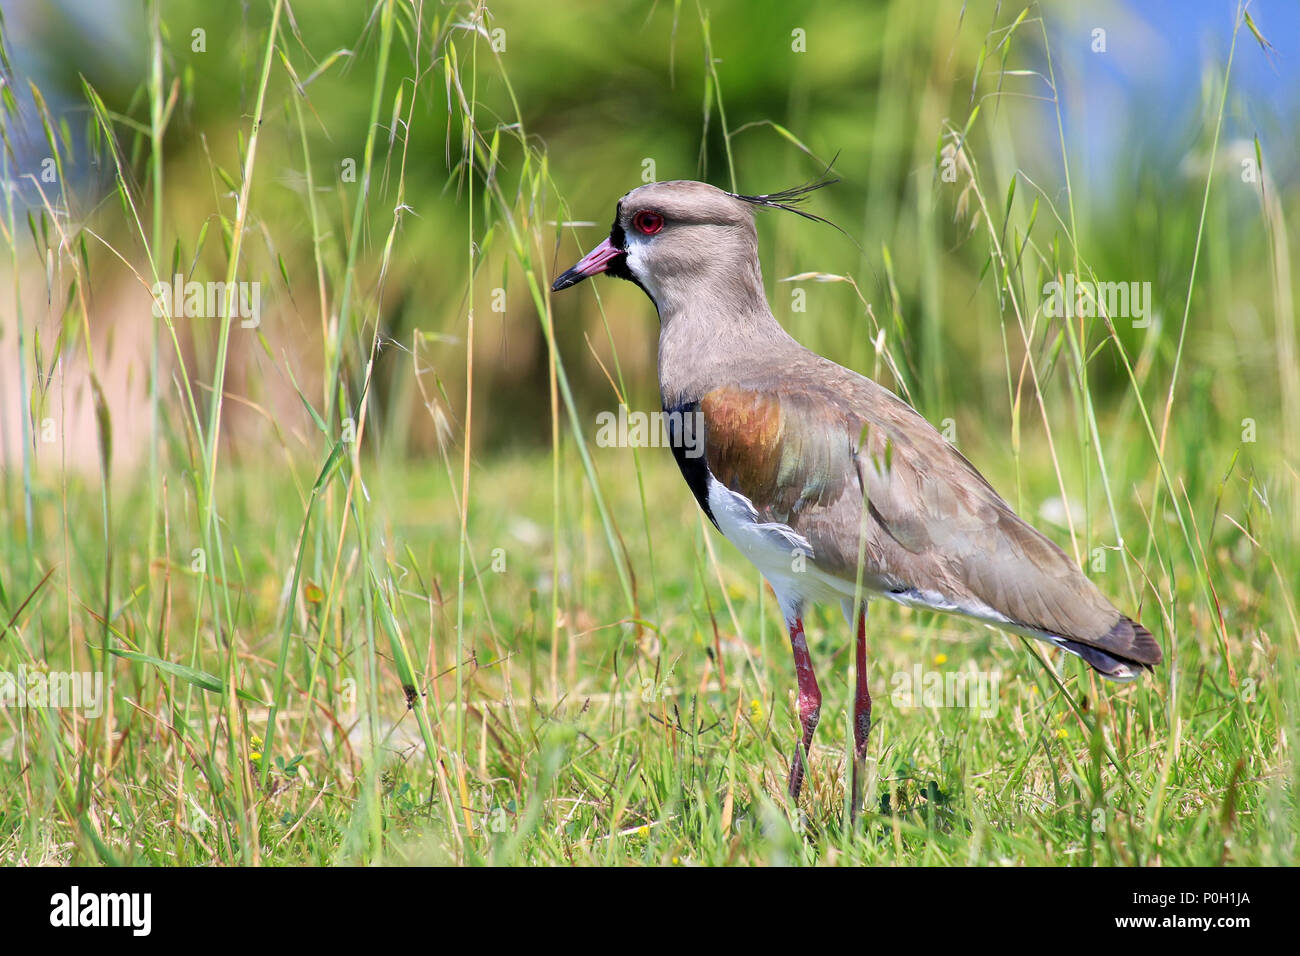 Southern Lapwing (Vanellus chilensis) on the bank of Plate River in Montevideo, Uruguay. This bird is the national bird of Uruguay. Stock Photo